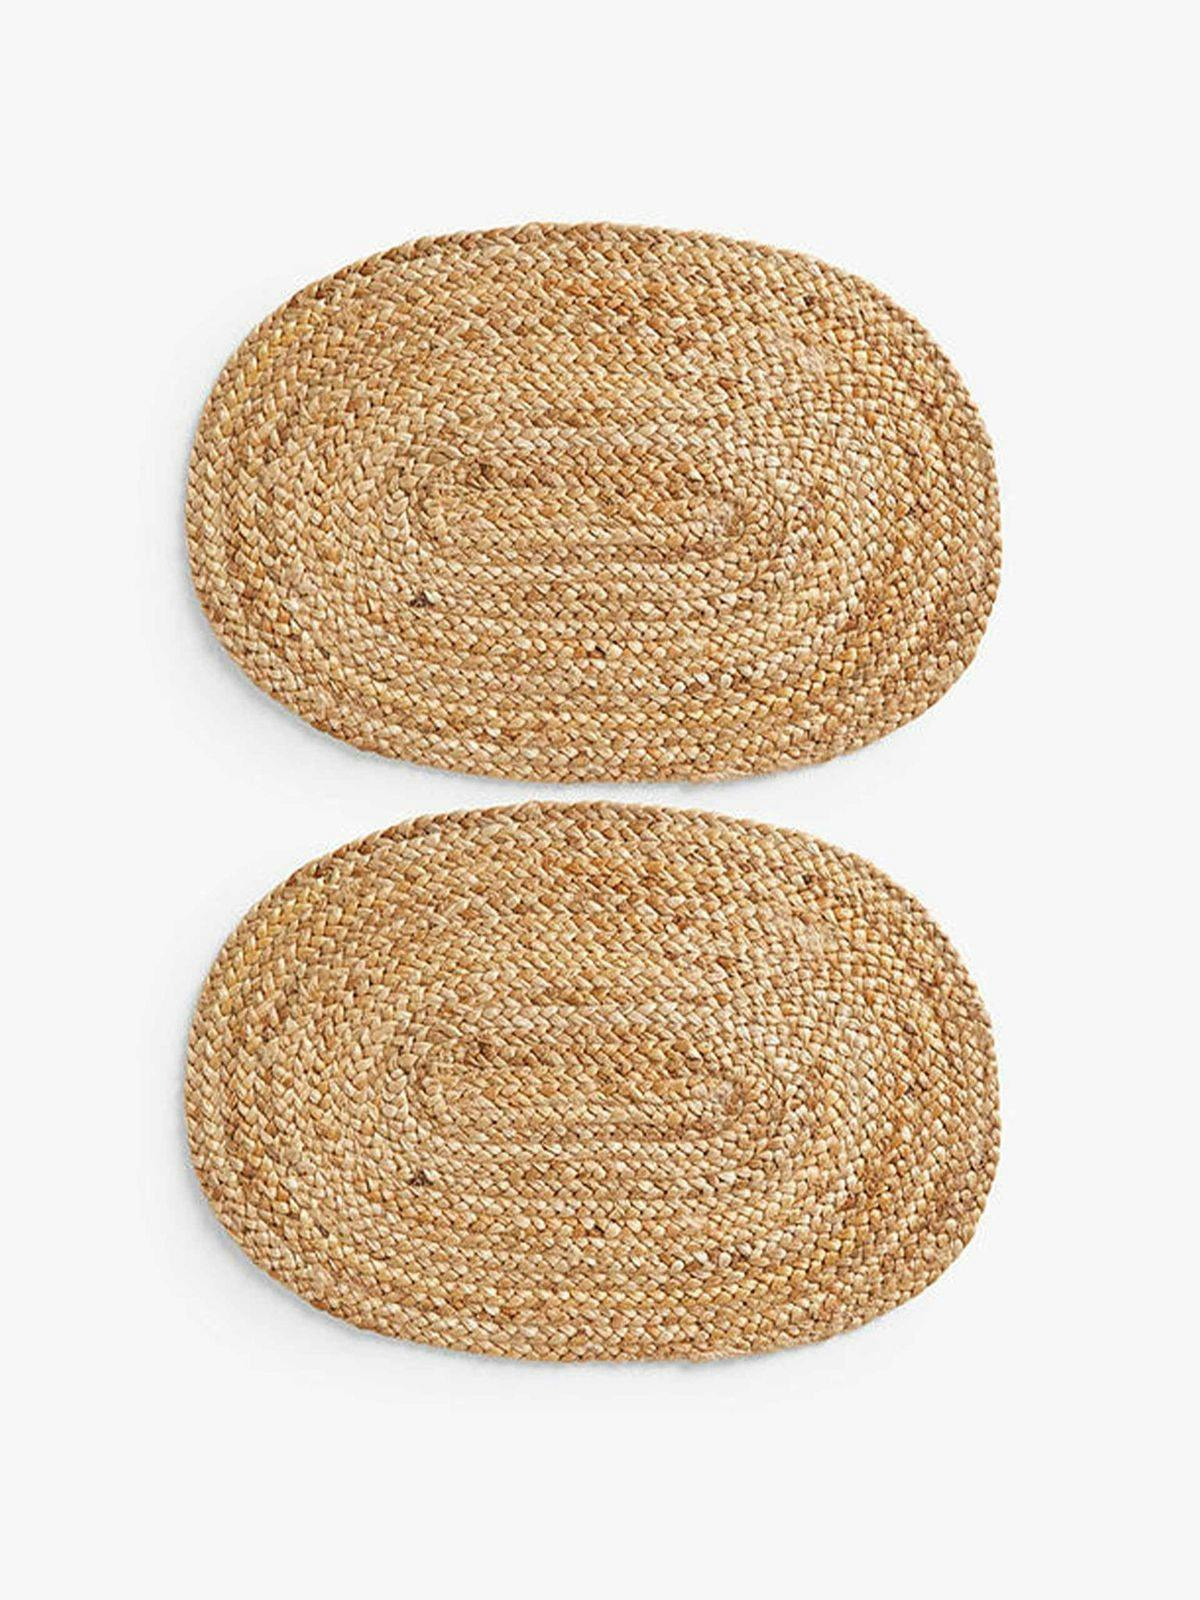 Jute oval table centrepiece placemats (set of 2)